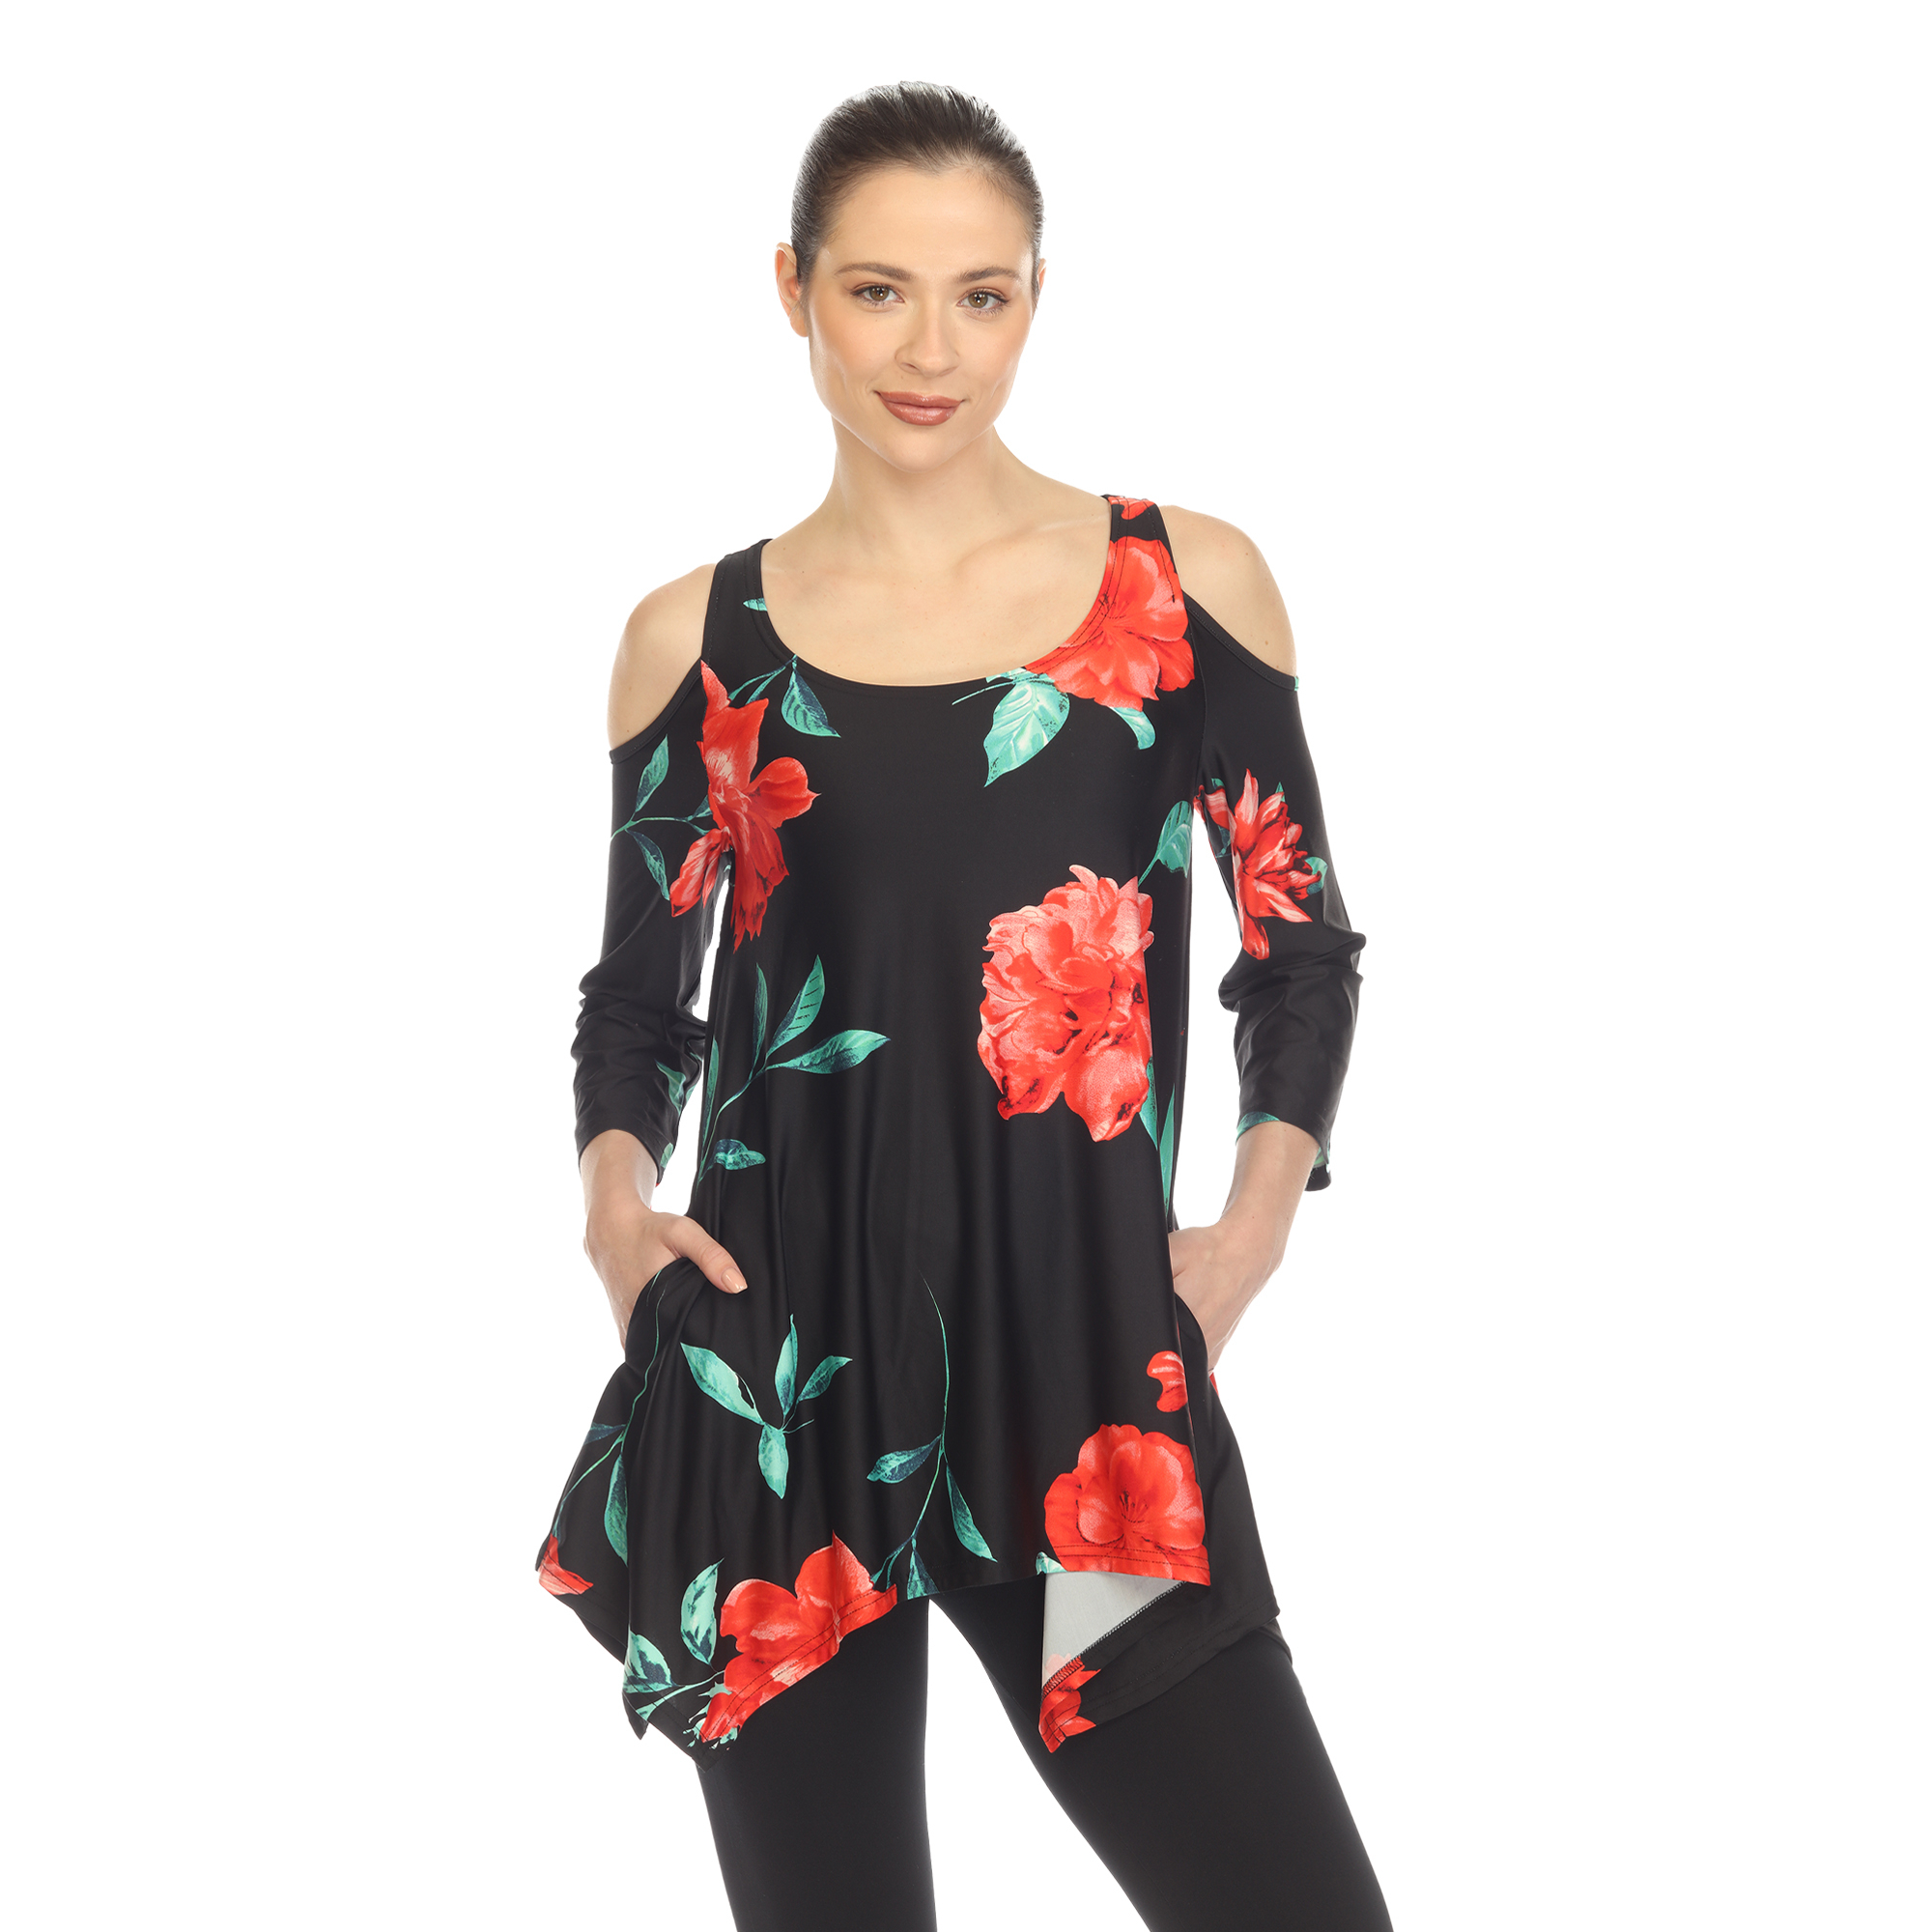 White Mark Women's Floral Print Quarter Sleeve Cold Shoulder Tunic Top With Pockets - Black/Red, Medium